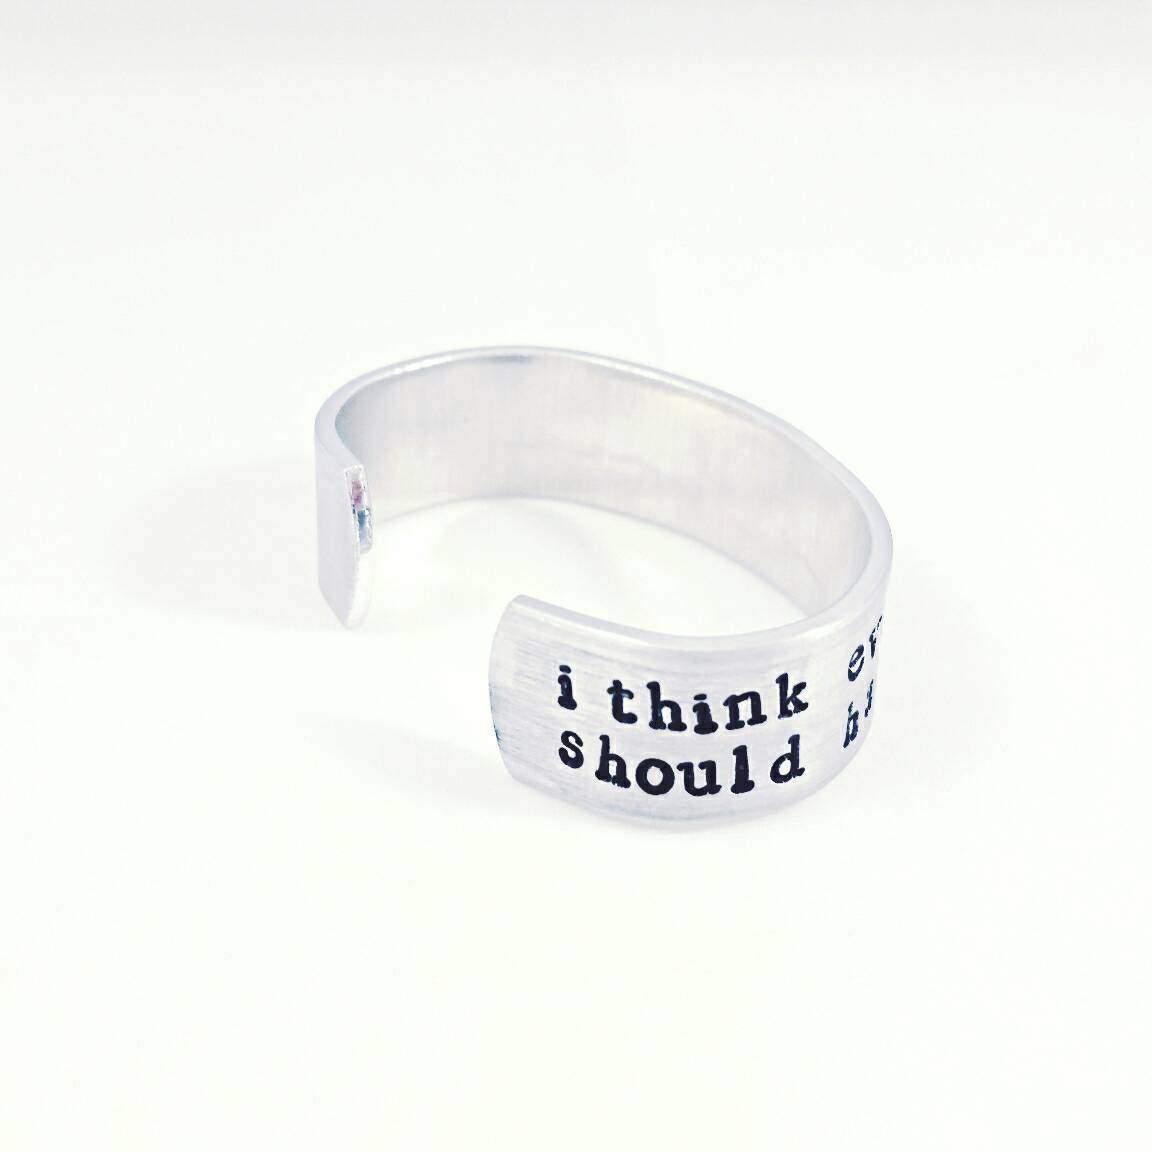 Julia Child Quotes Napkin Rings Salt and Sparkle